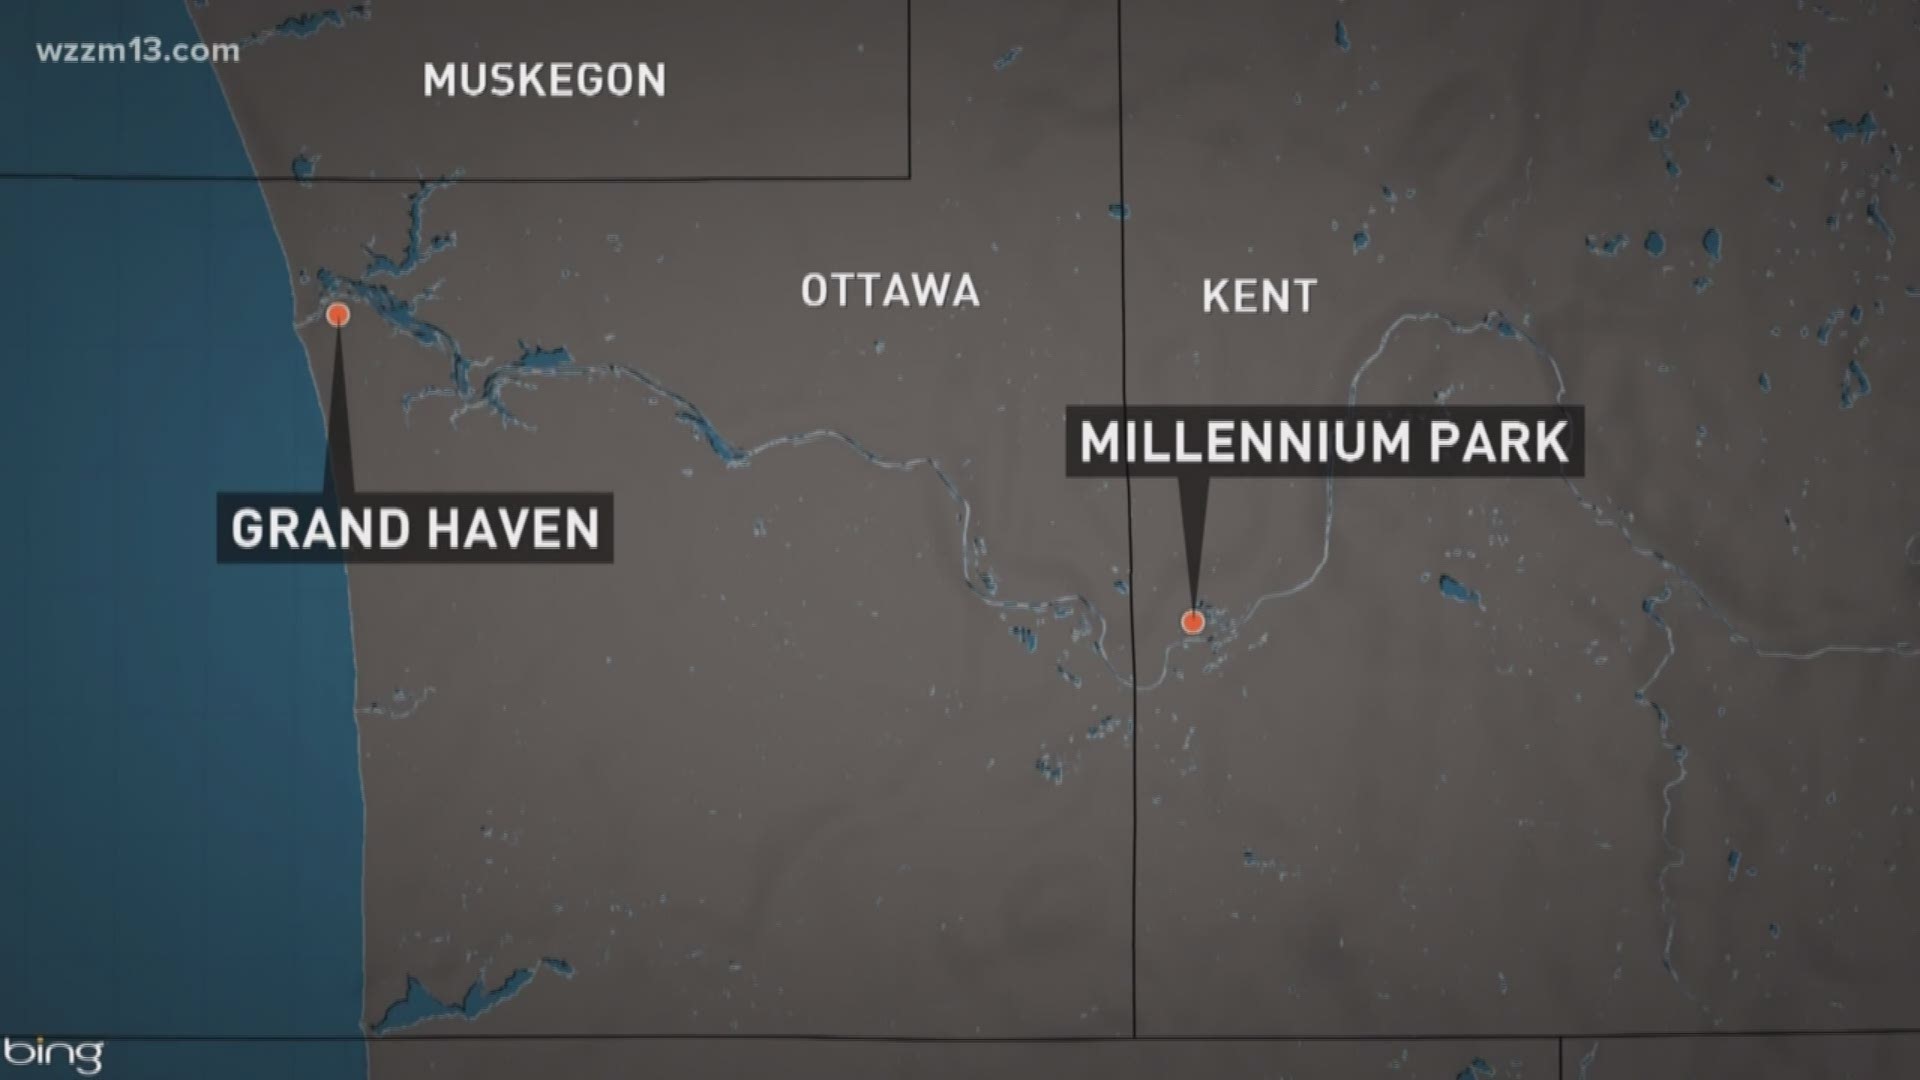 The overall project would connect Grand Haven in Ottawa County to Millennium Park in Kent County.